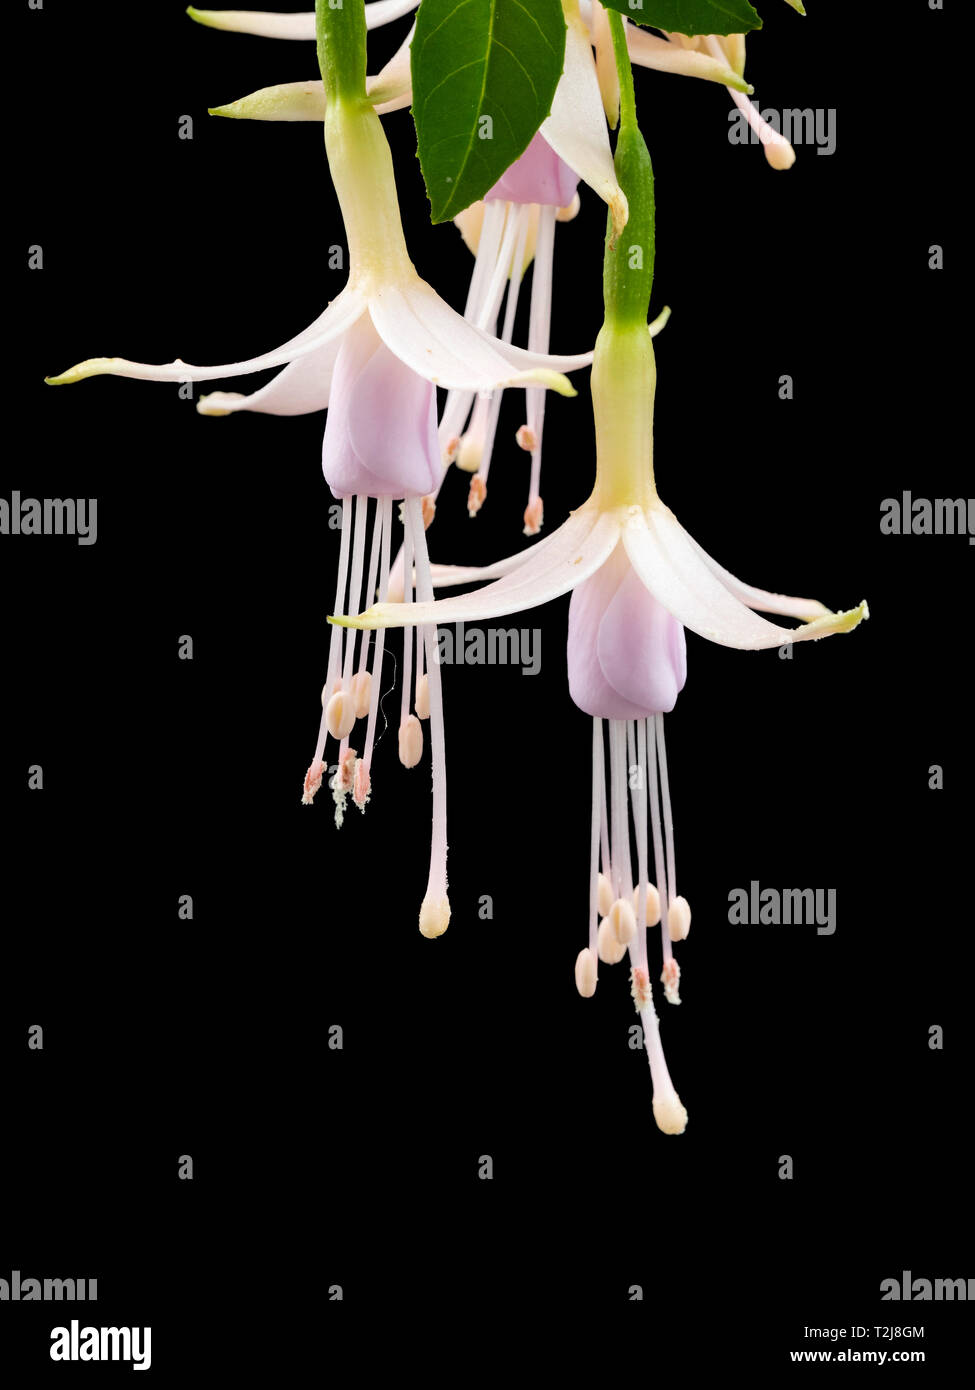 Pendant pale pink and white flowers of the hardy shrub, Fuchsia magellanica var molinae, against a black background Stock Photo